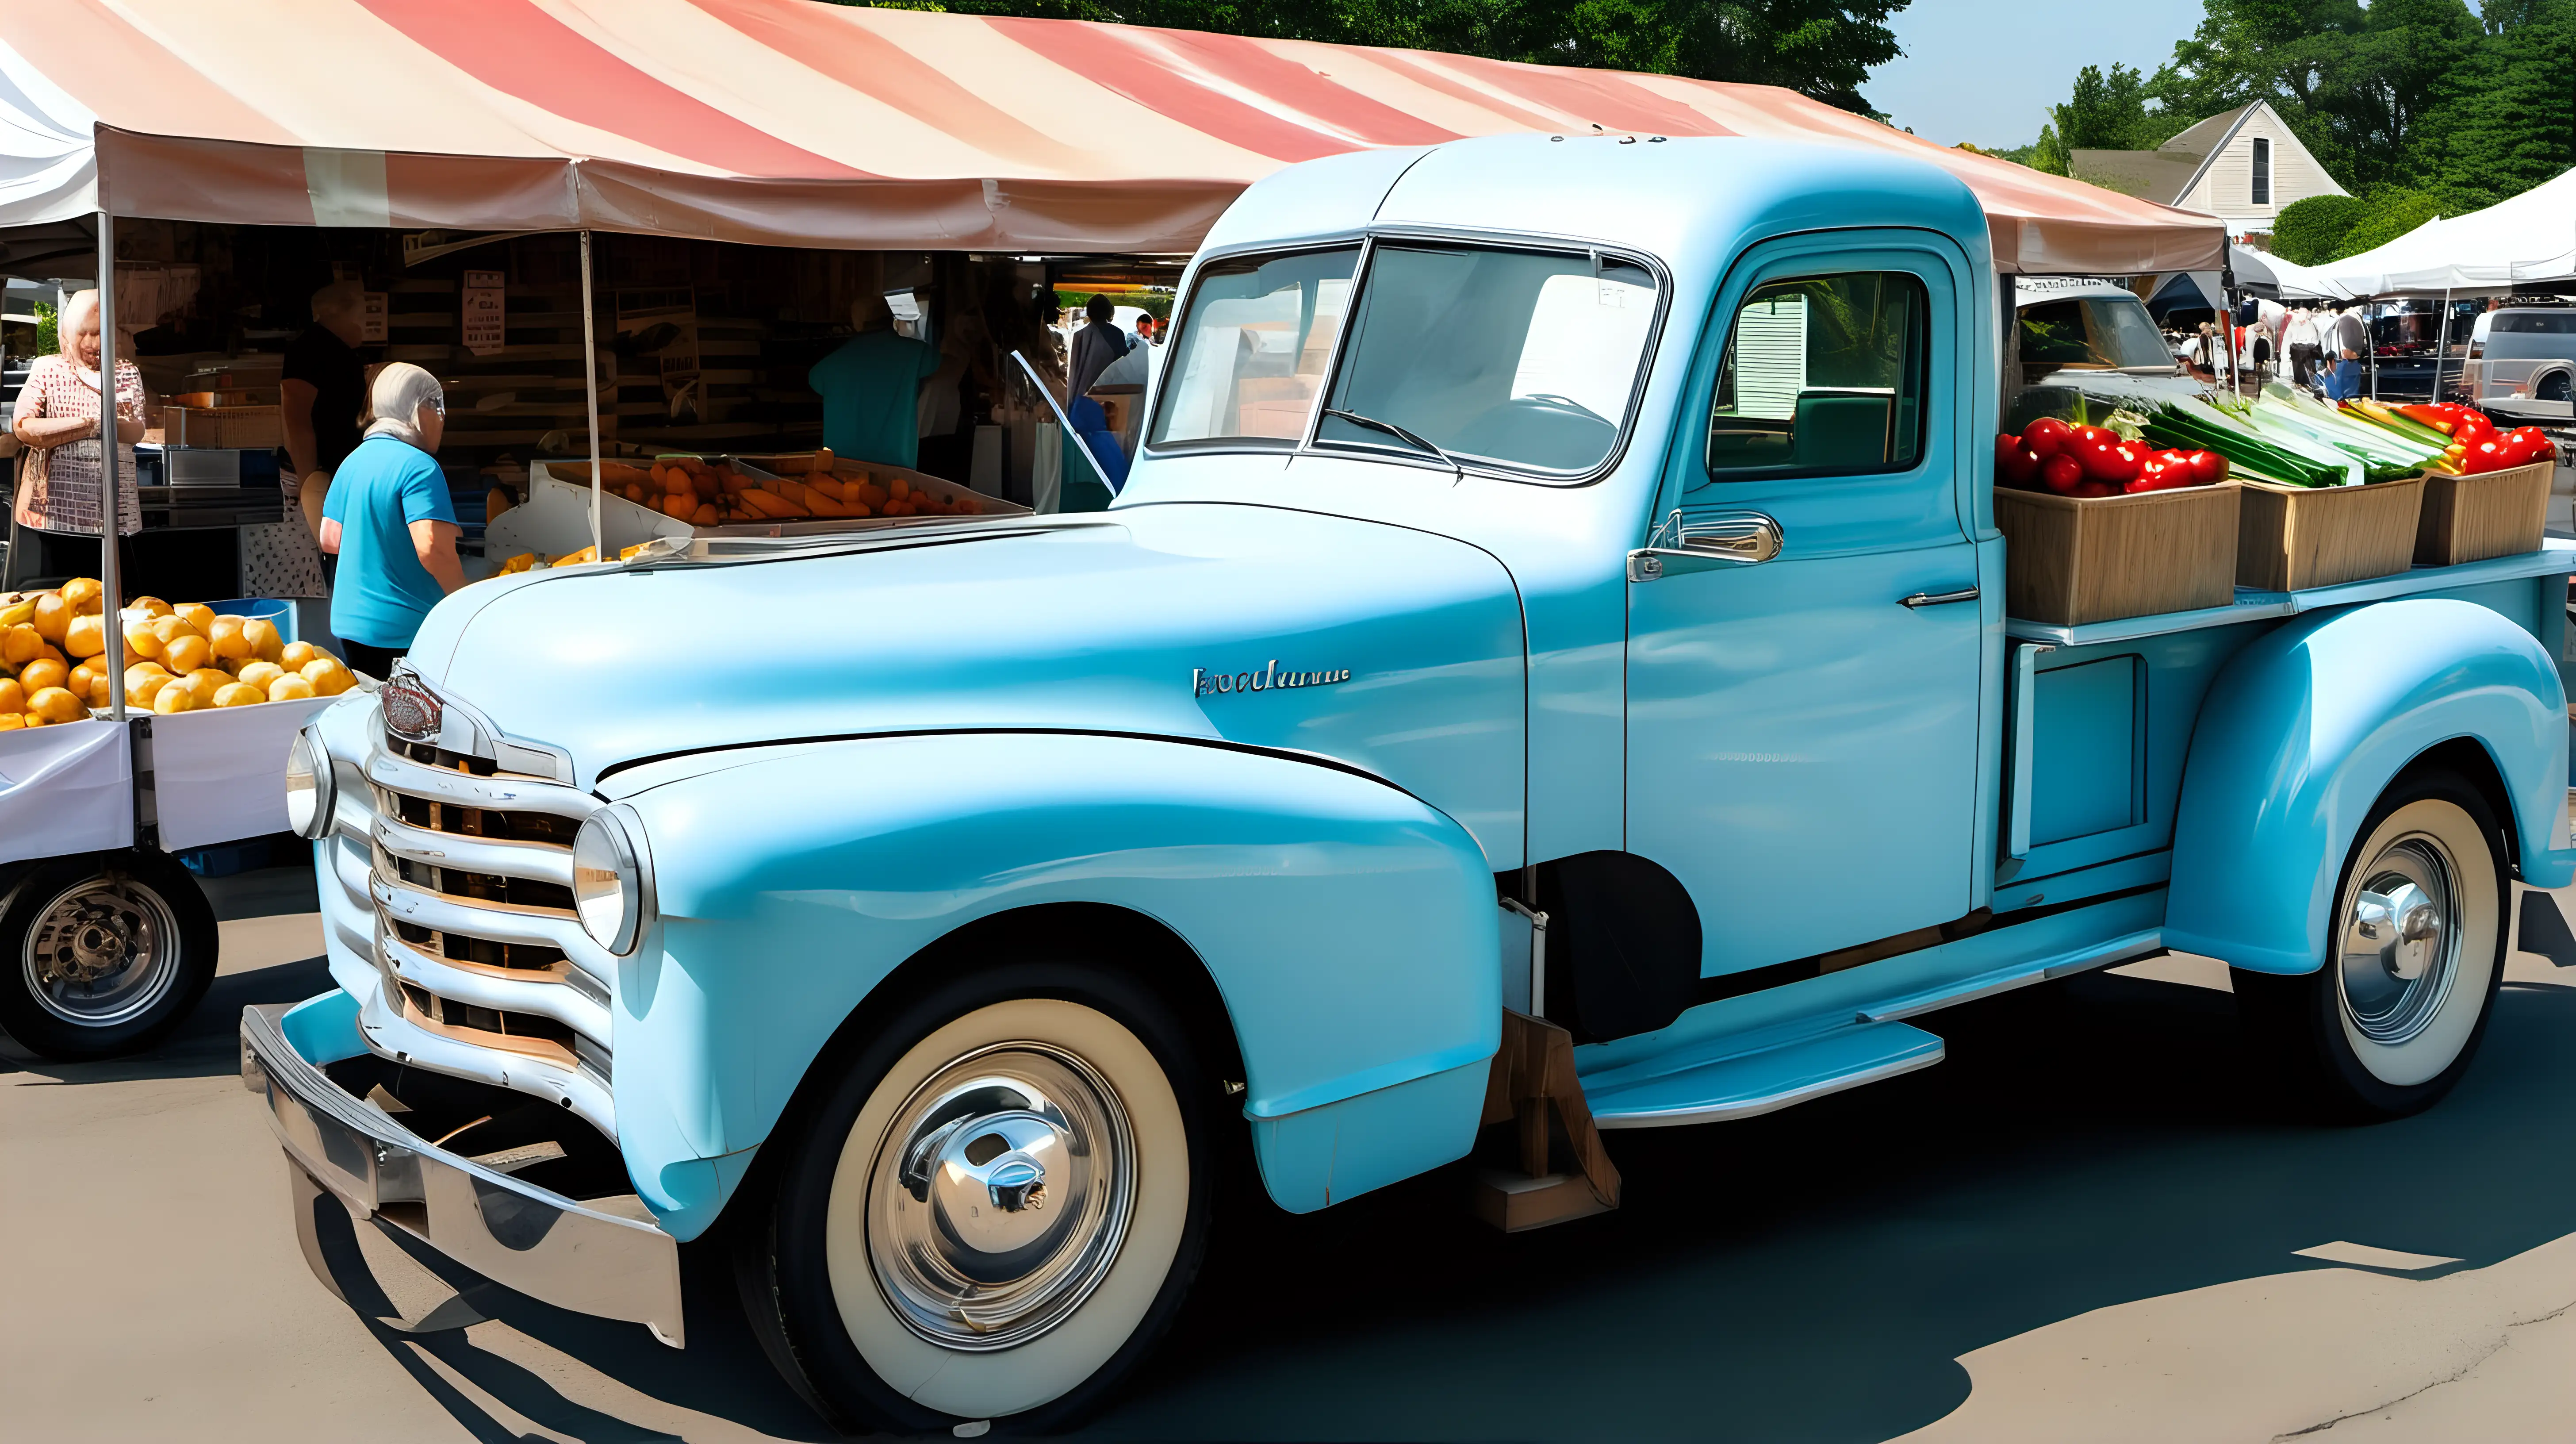 A charming baby blue vintage truck parked at a roadside farmer's market, its pristine condition a testament to careful restoration.